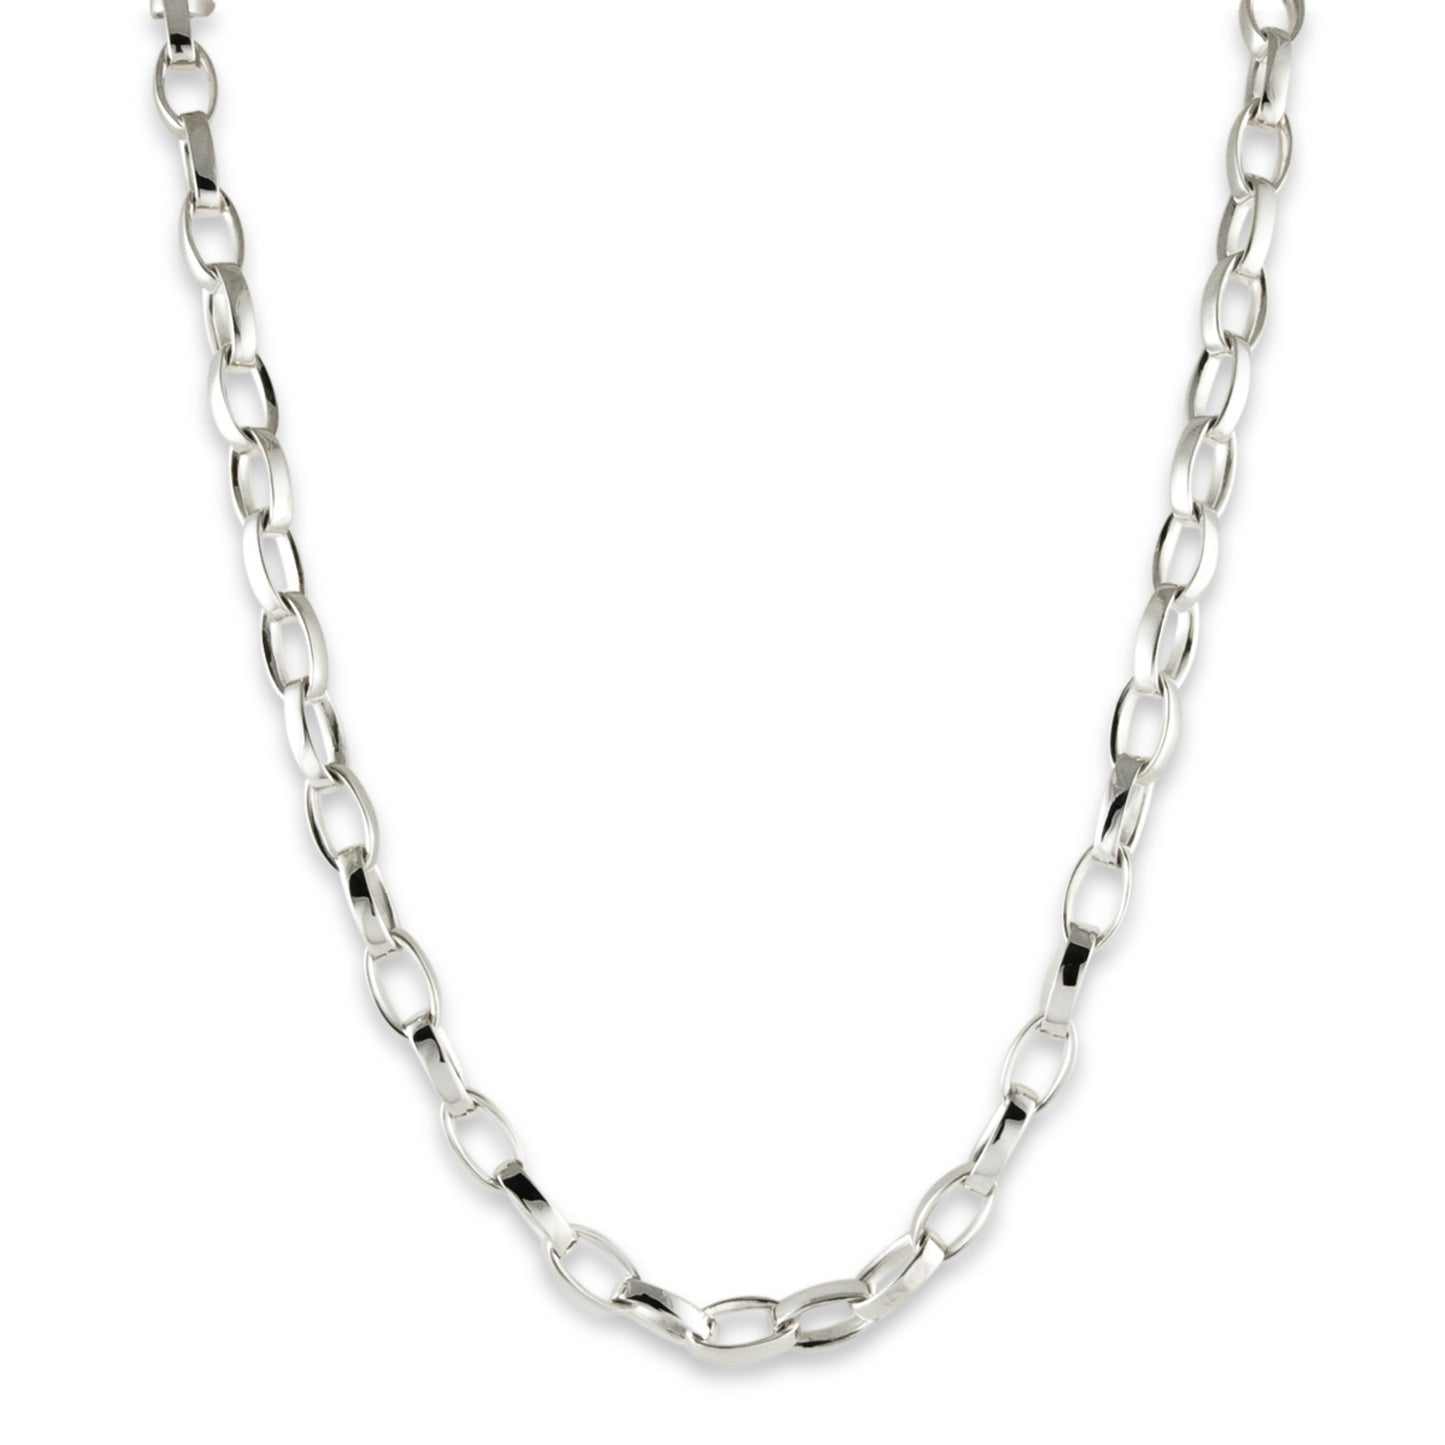 SILVER OPEN LINK CHAIN 17"